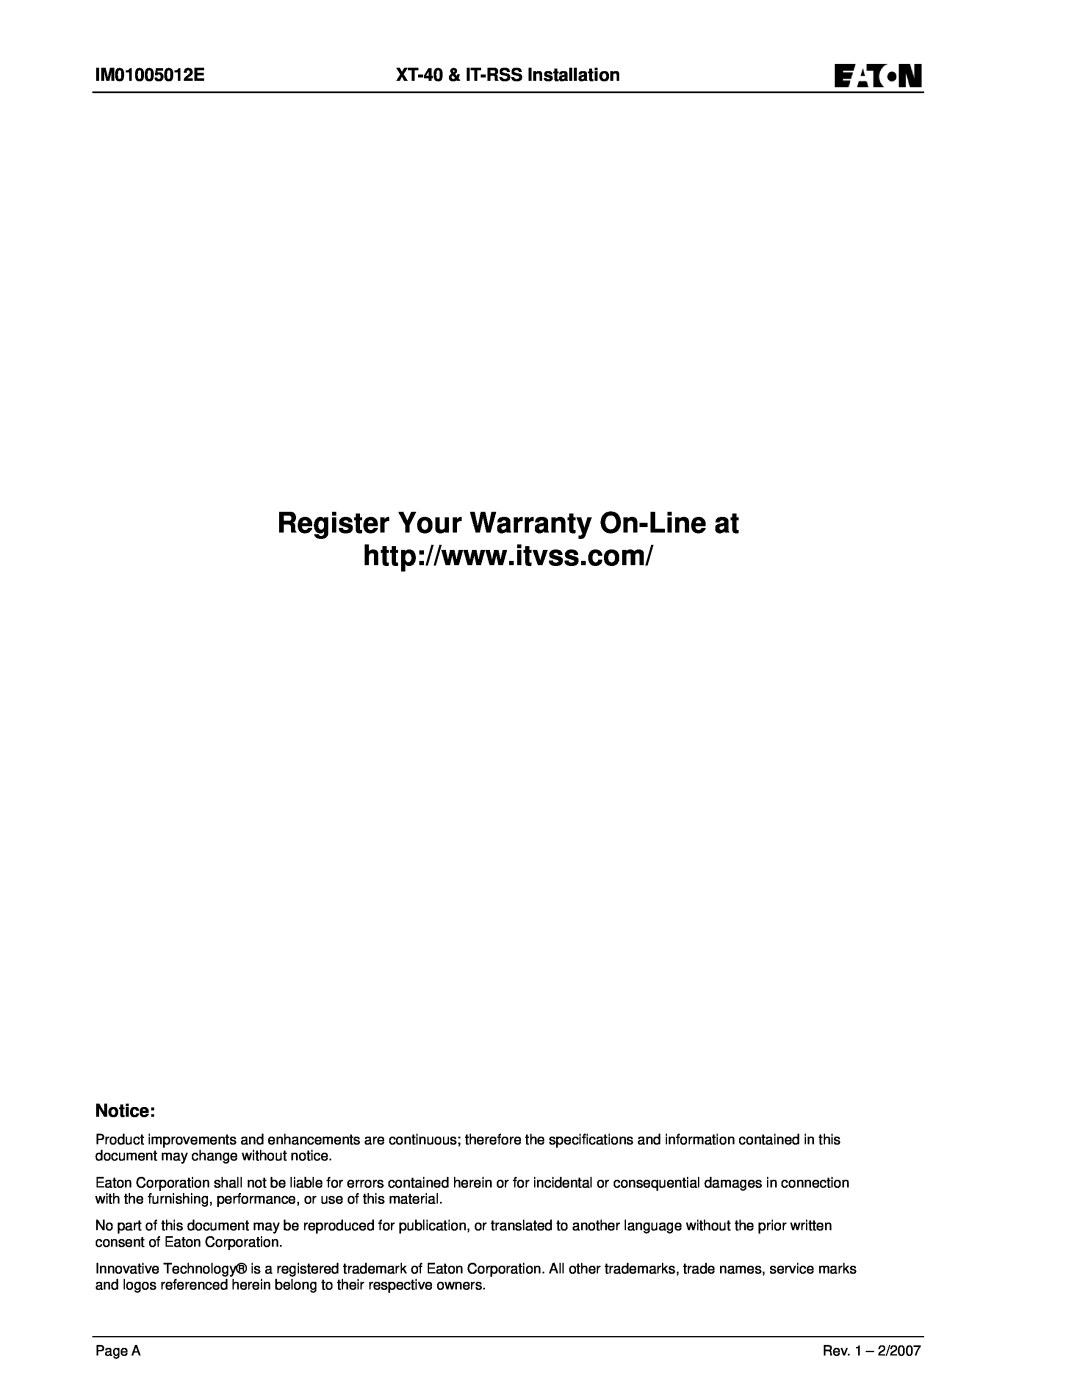 Eaton Electrical IM01005012E instruction manual Register Your Warranty On-Line at, XT-40 & IT-RSS Installation 